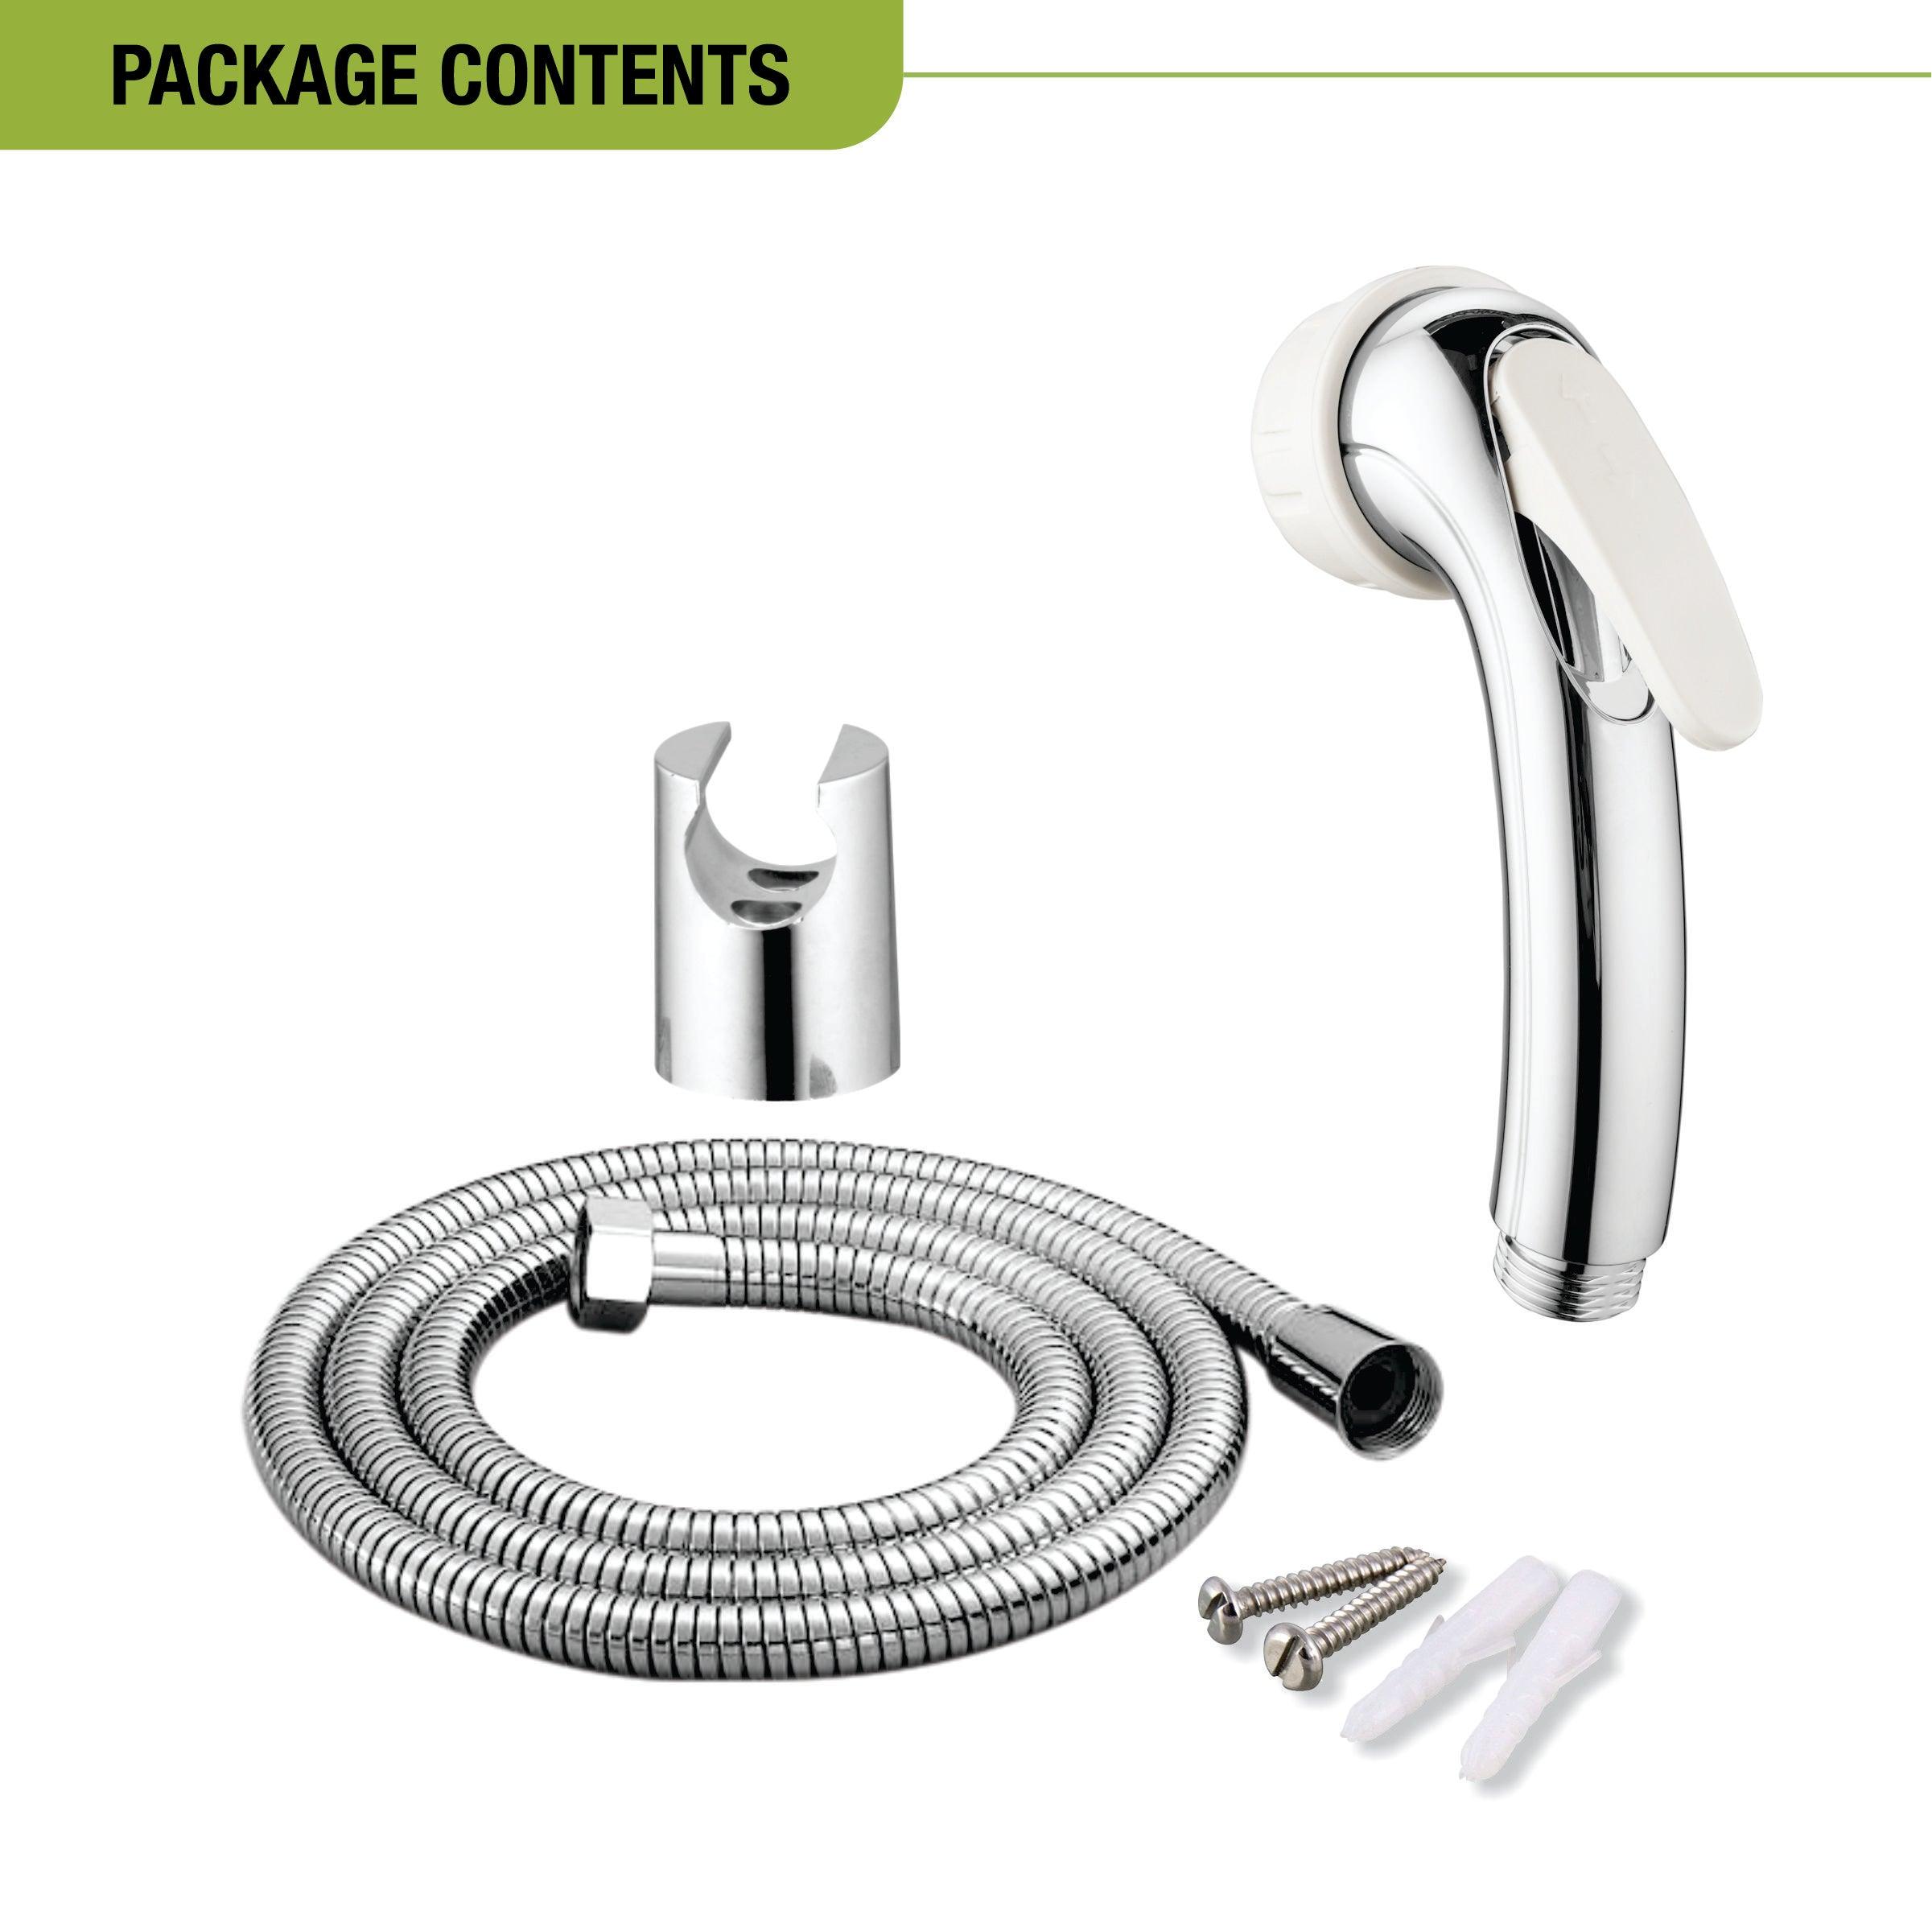 Rose Health Faucet (Complete Set) package contents